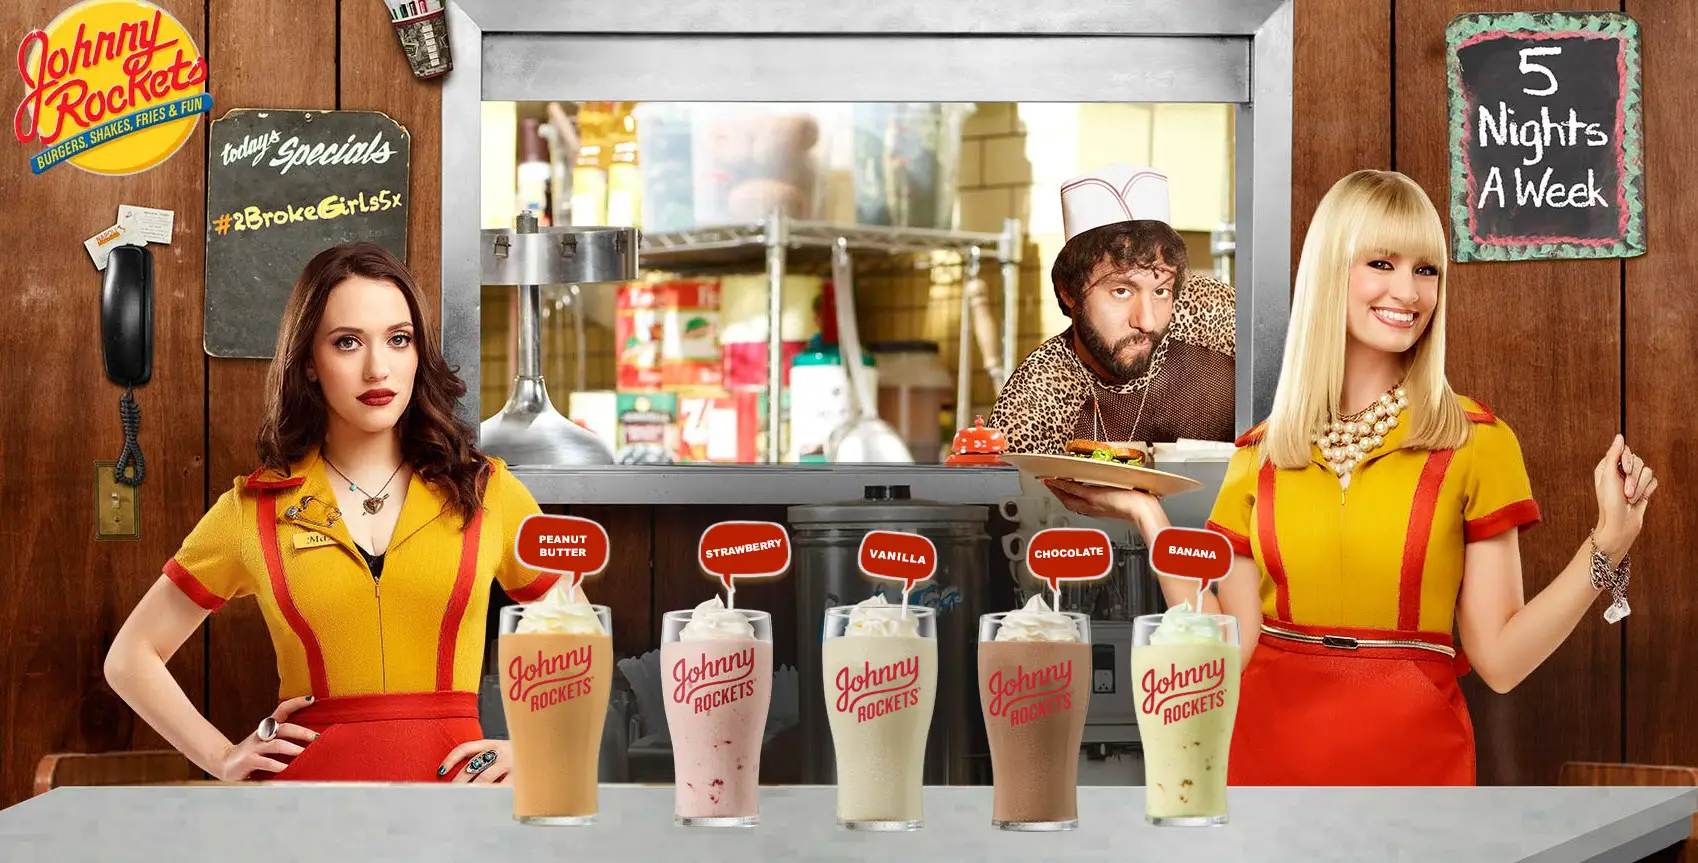 Enter for your chance to win a trip for two to Hollywood plus a $500 gift card when you enter today's correct "shake flavor" to enter the 2 Broke Girls Johnny Rockets Sweet Shakes Sweepstakes